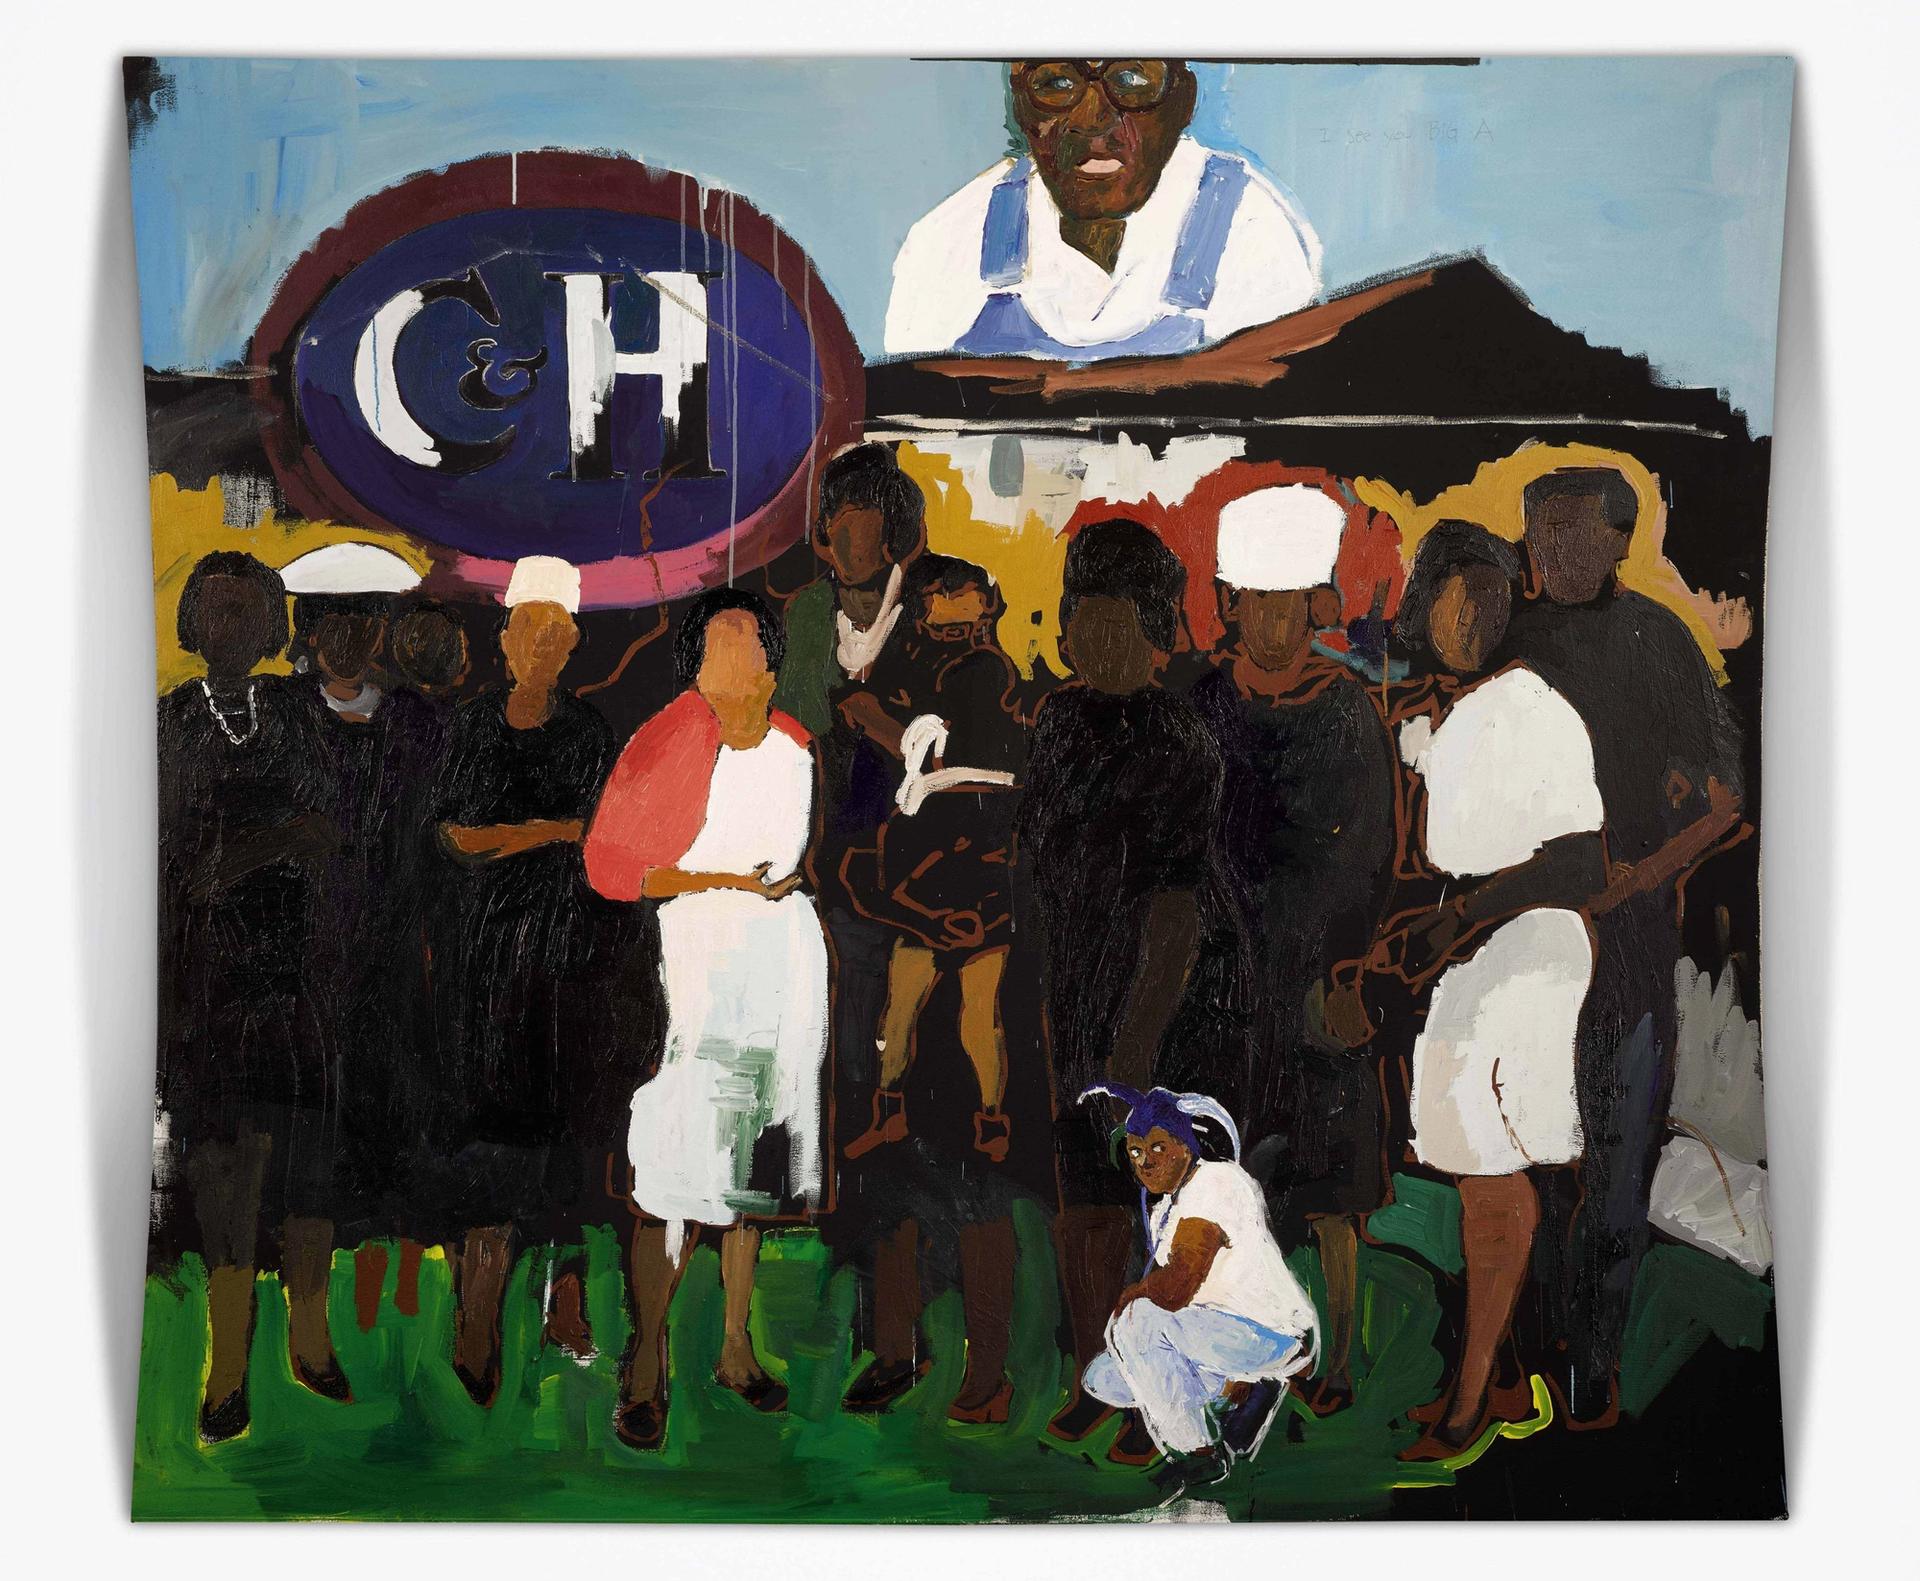 Henry Taylor, C&H (2006), made a new artist record Sotheby's